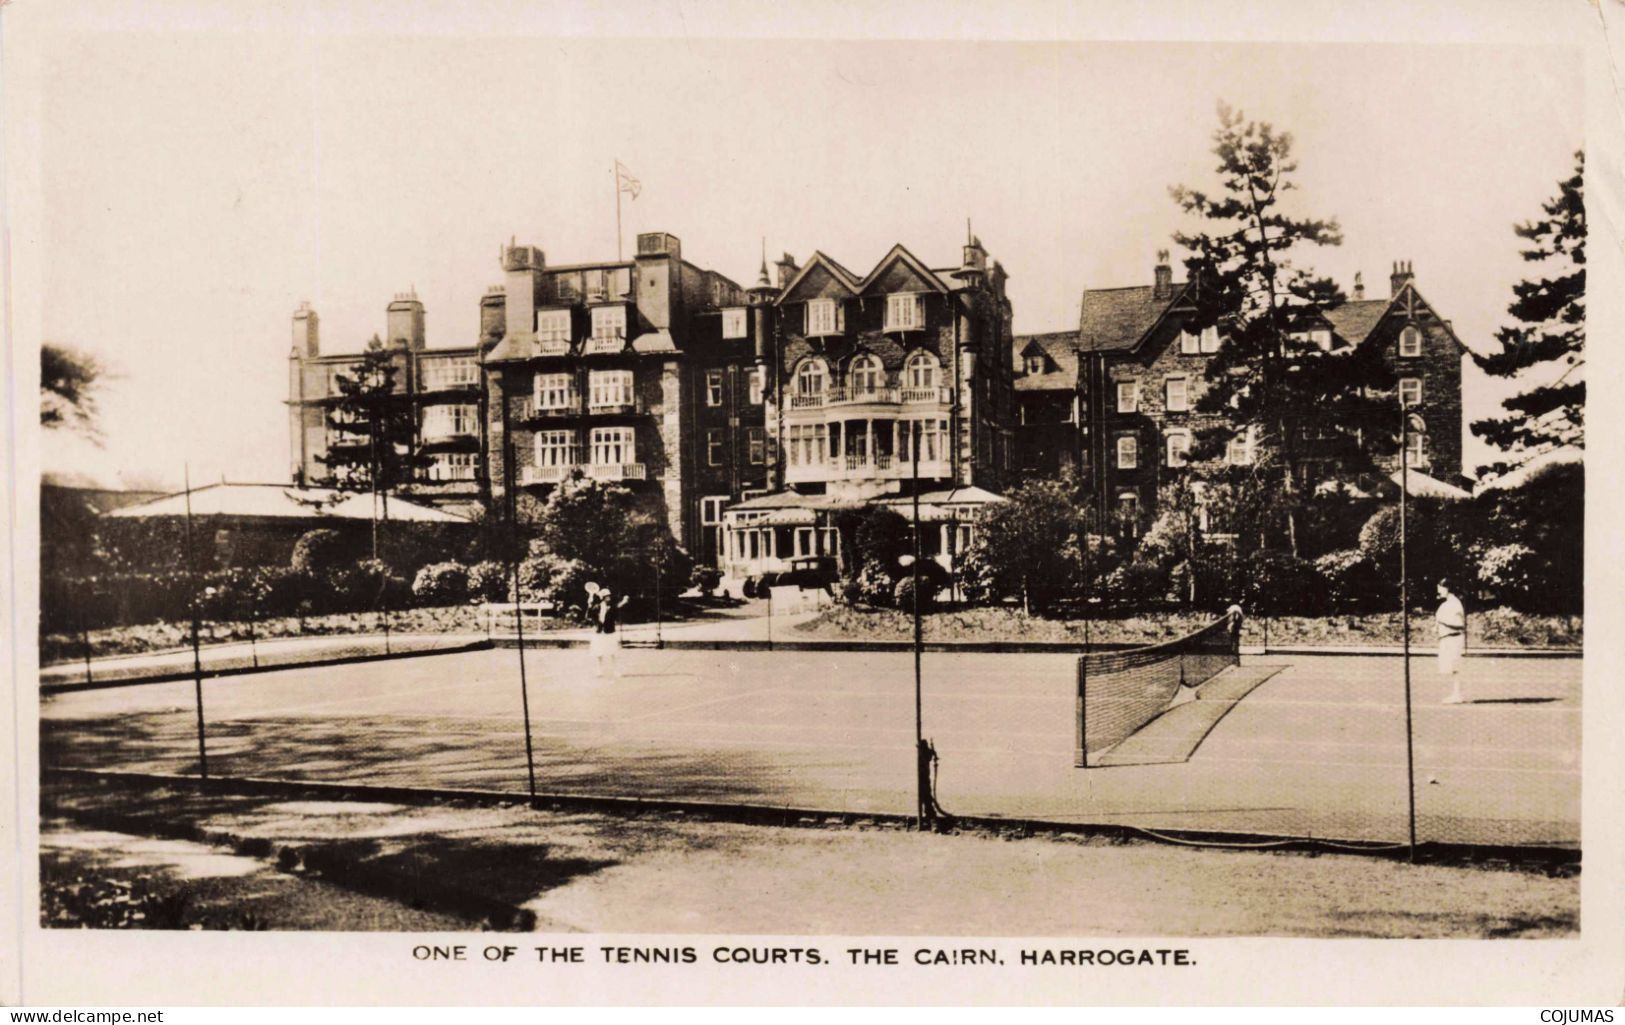 ANGLETERRE - S14650 - One Of The Tennis Courts The Cairn Harrogate - Automobile Sport - L23 - Harrogate